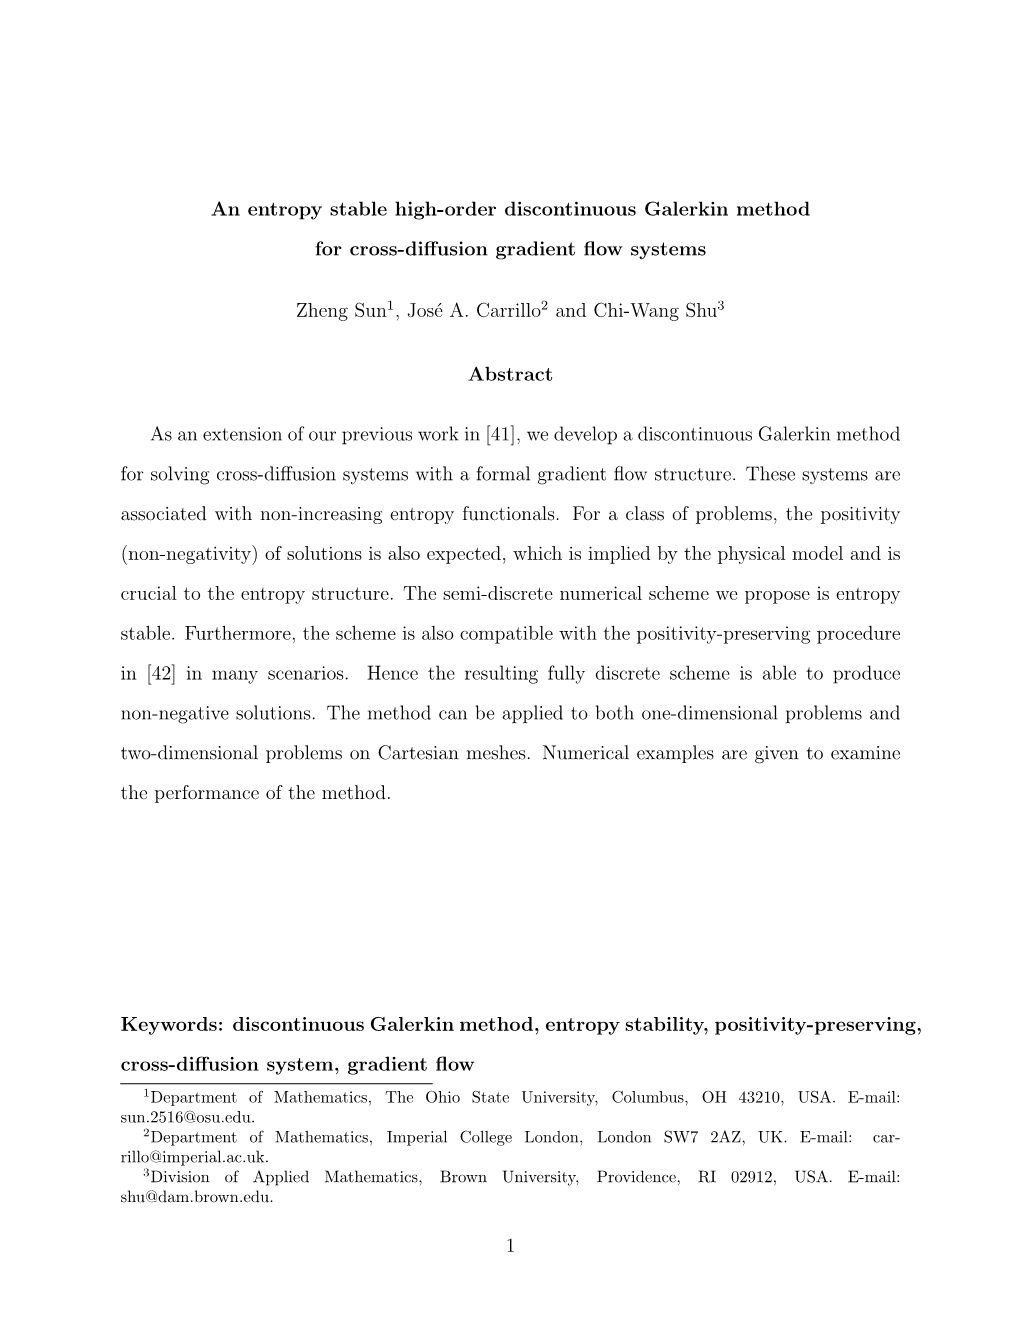 An Entropy Stable High-Order Discontinuous Galerkin Method for Cross-Diﬀusion Gradient ﬂow Systems